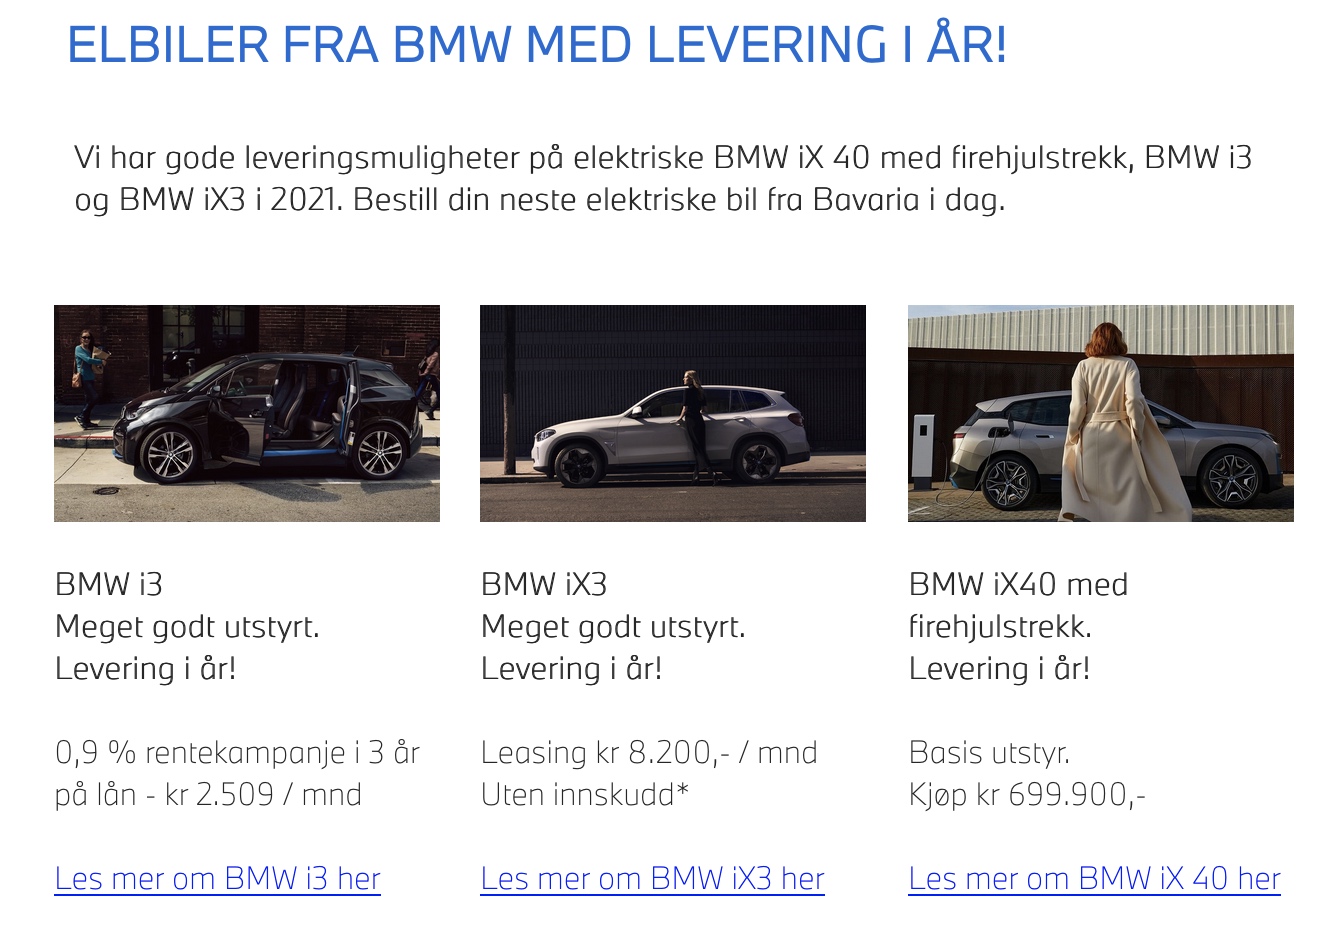 BMW leasing offers